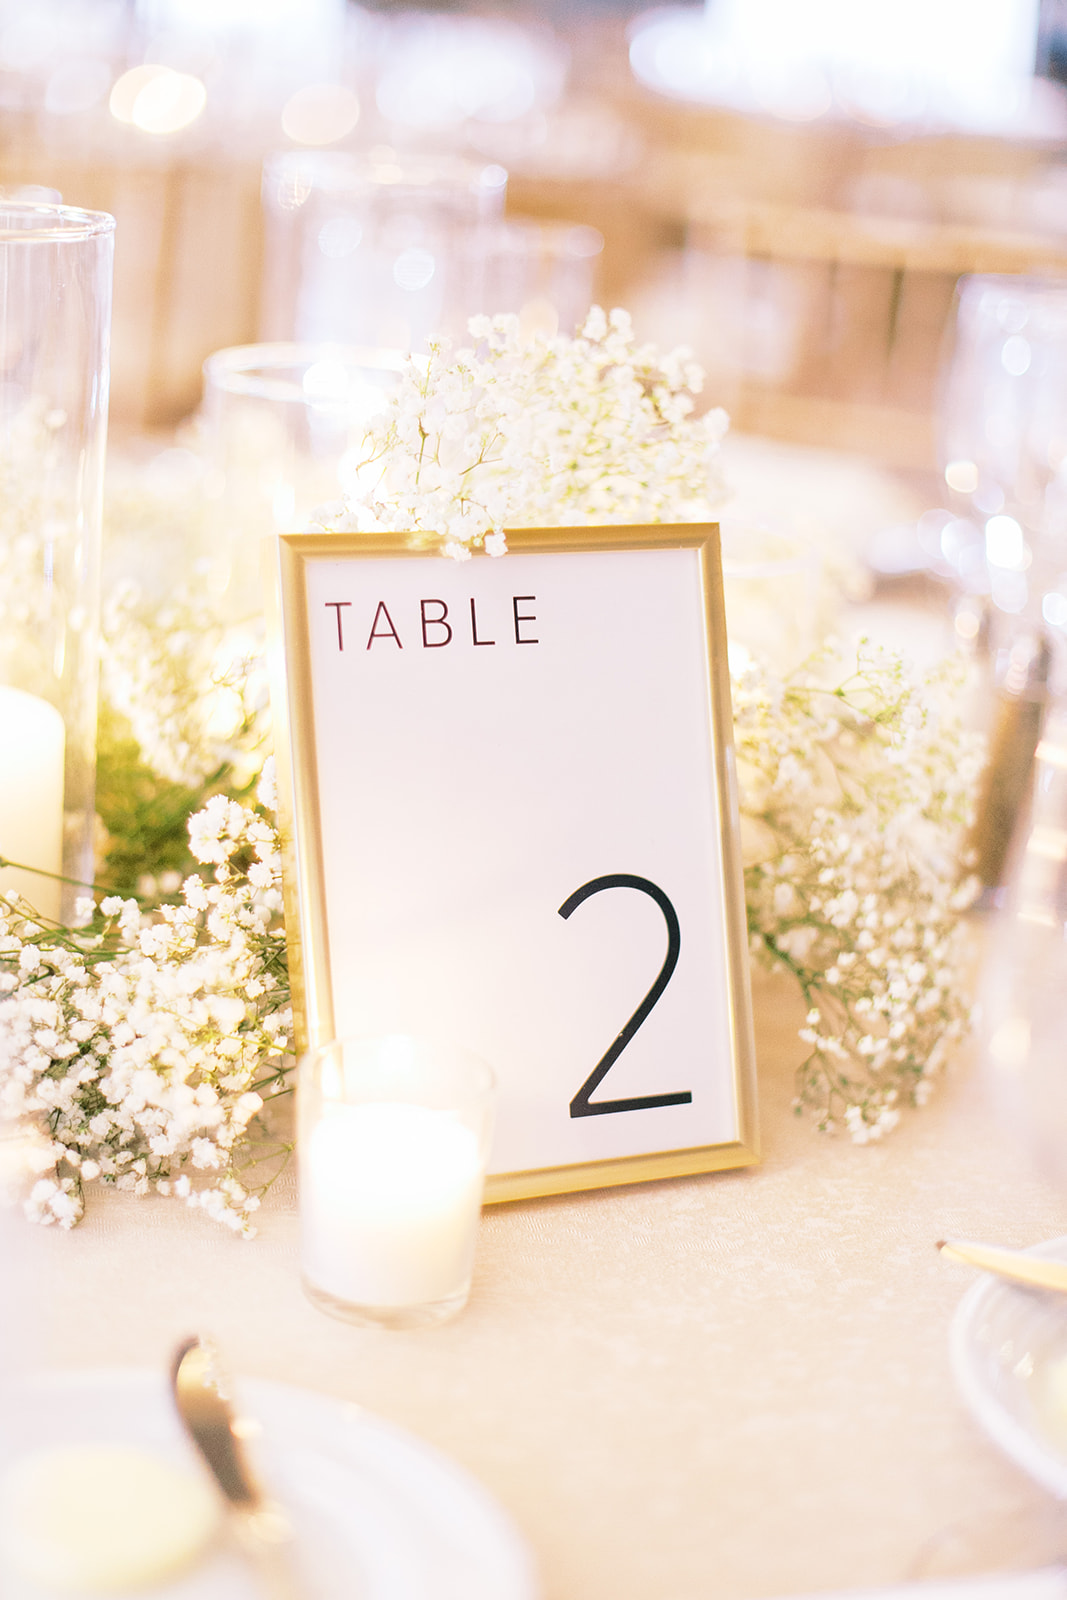 Gold framed table number sign with black font and candles with baby's breath behind it.